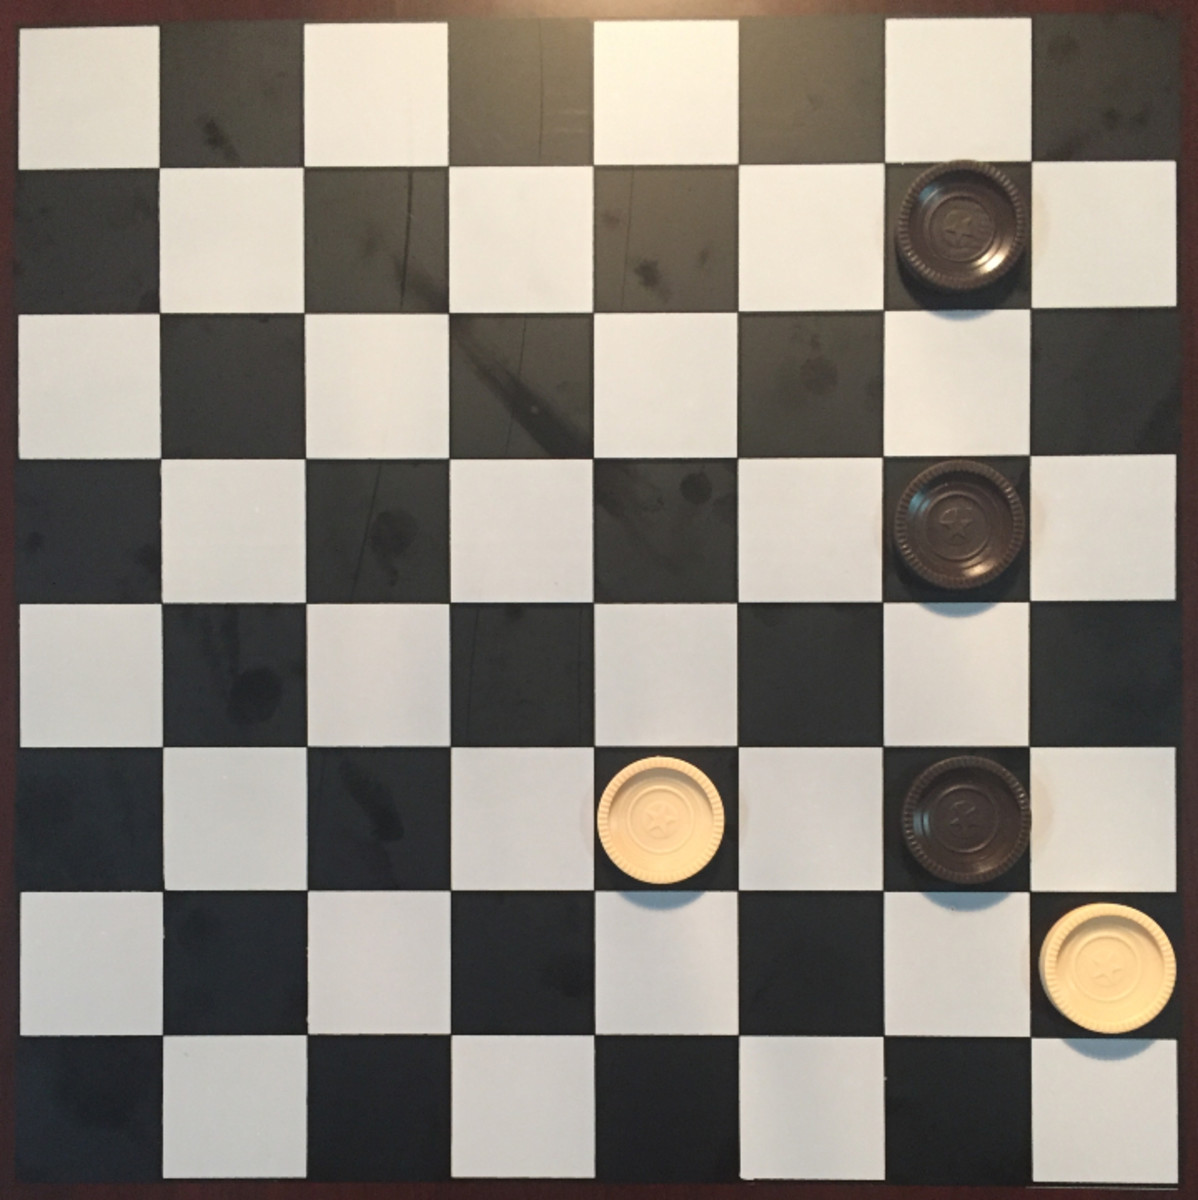 checkers-strategy-tactics-how-to-win